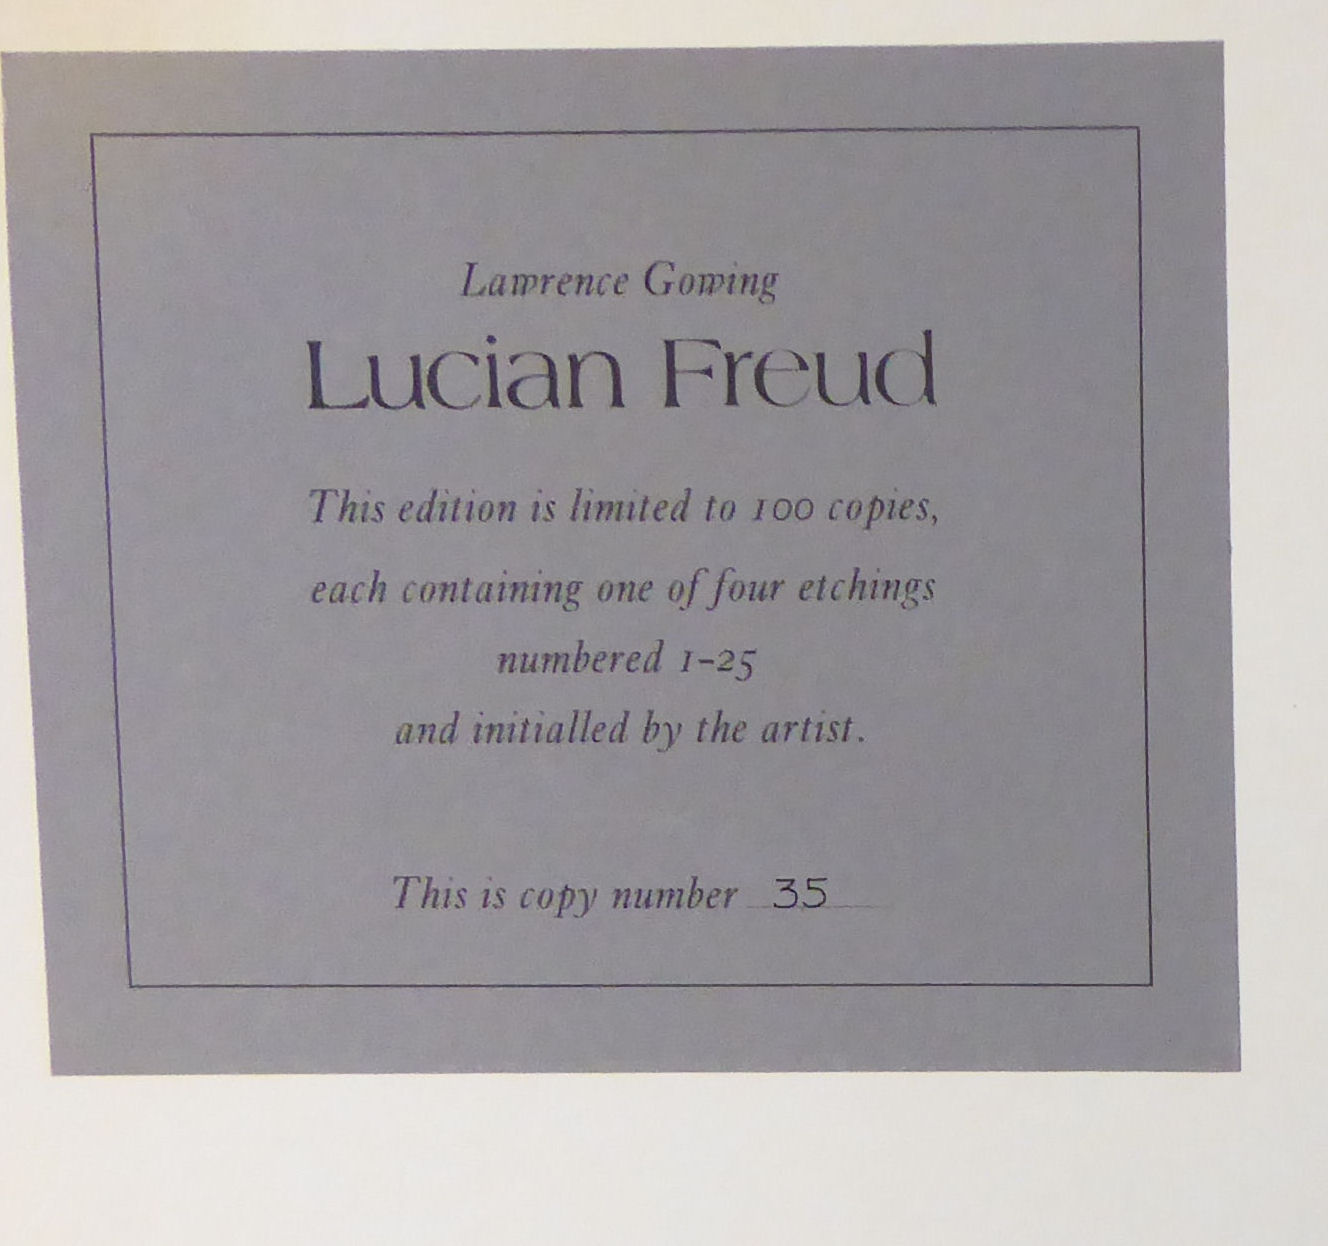 Book: 'Lucian Freud' by Lawrence Gowring, - Image 10 of 10